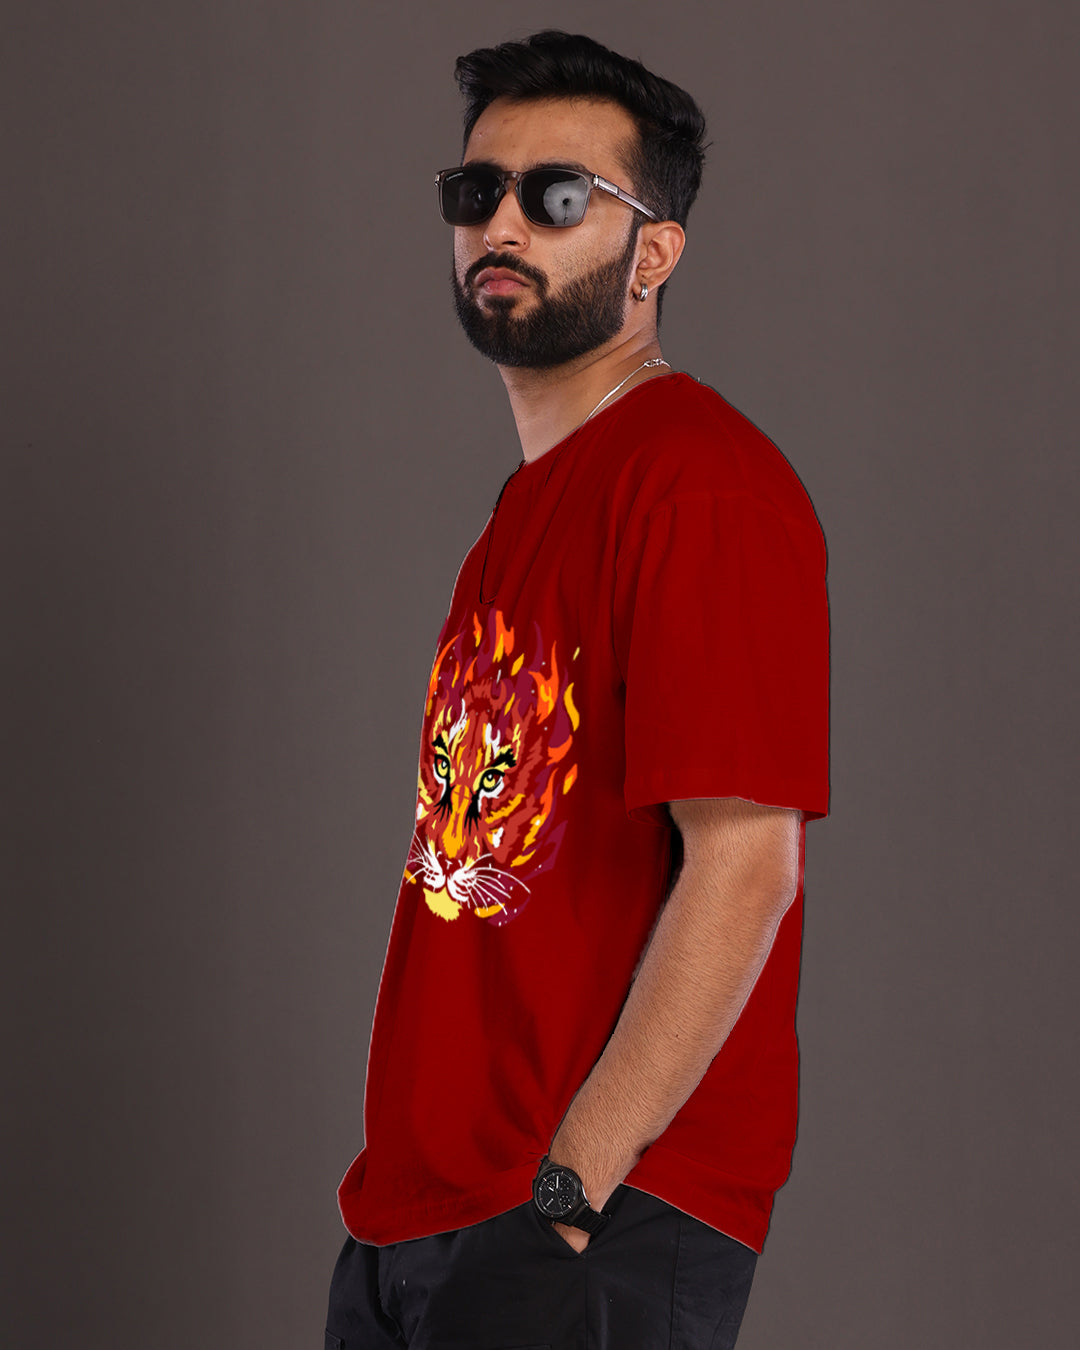 Red Tiger Roar: Men's Oversized Tee for Unmatched Confidence